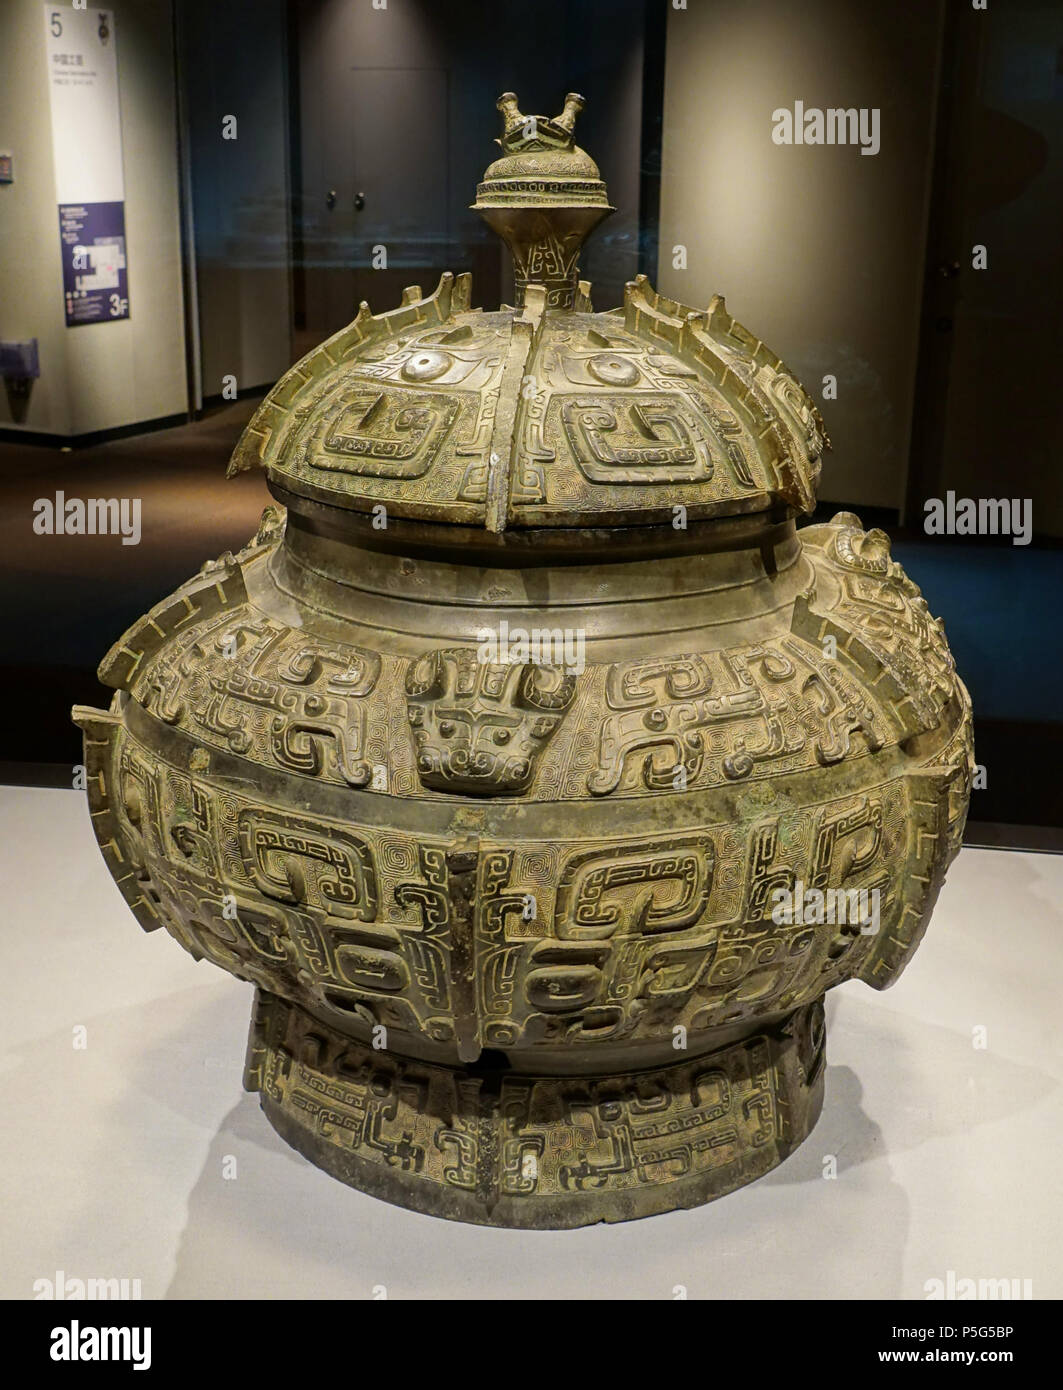 N/A. English: Exhibit in the Tokyo National Museum - Tokyo, Japan. 1 August 2017, 22:05:15. Daderot 247 Bu jar with Taotie design, China, Shang dynasty, 13th-11th century BC, bronze - Tokyo National Museum - Tokyo, Japan - DSC08459 Stock Photo